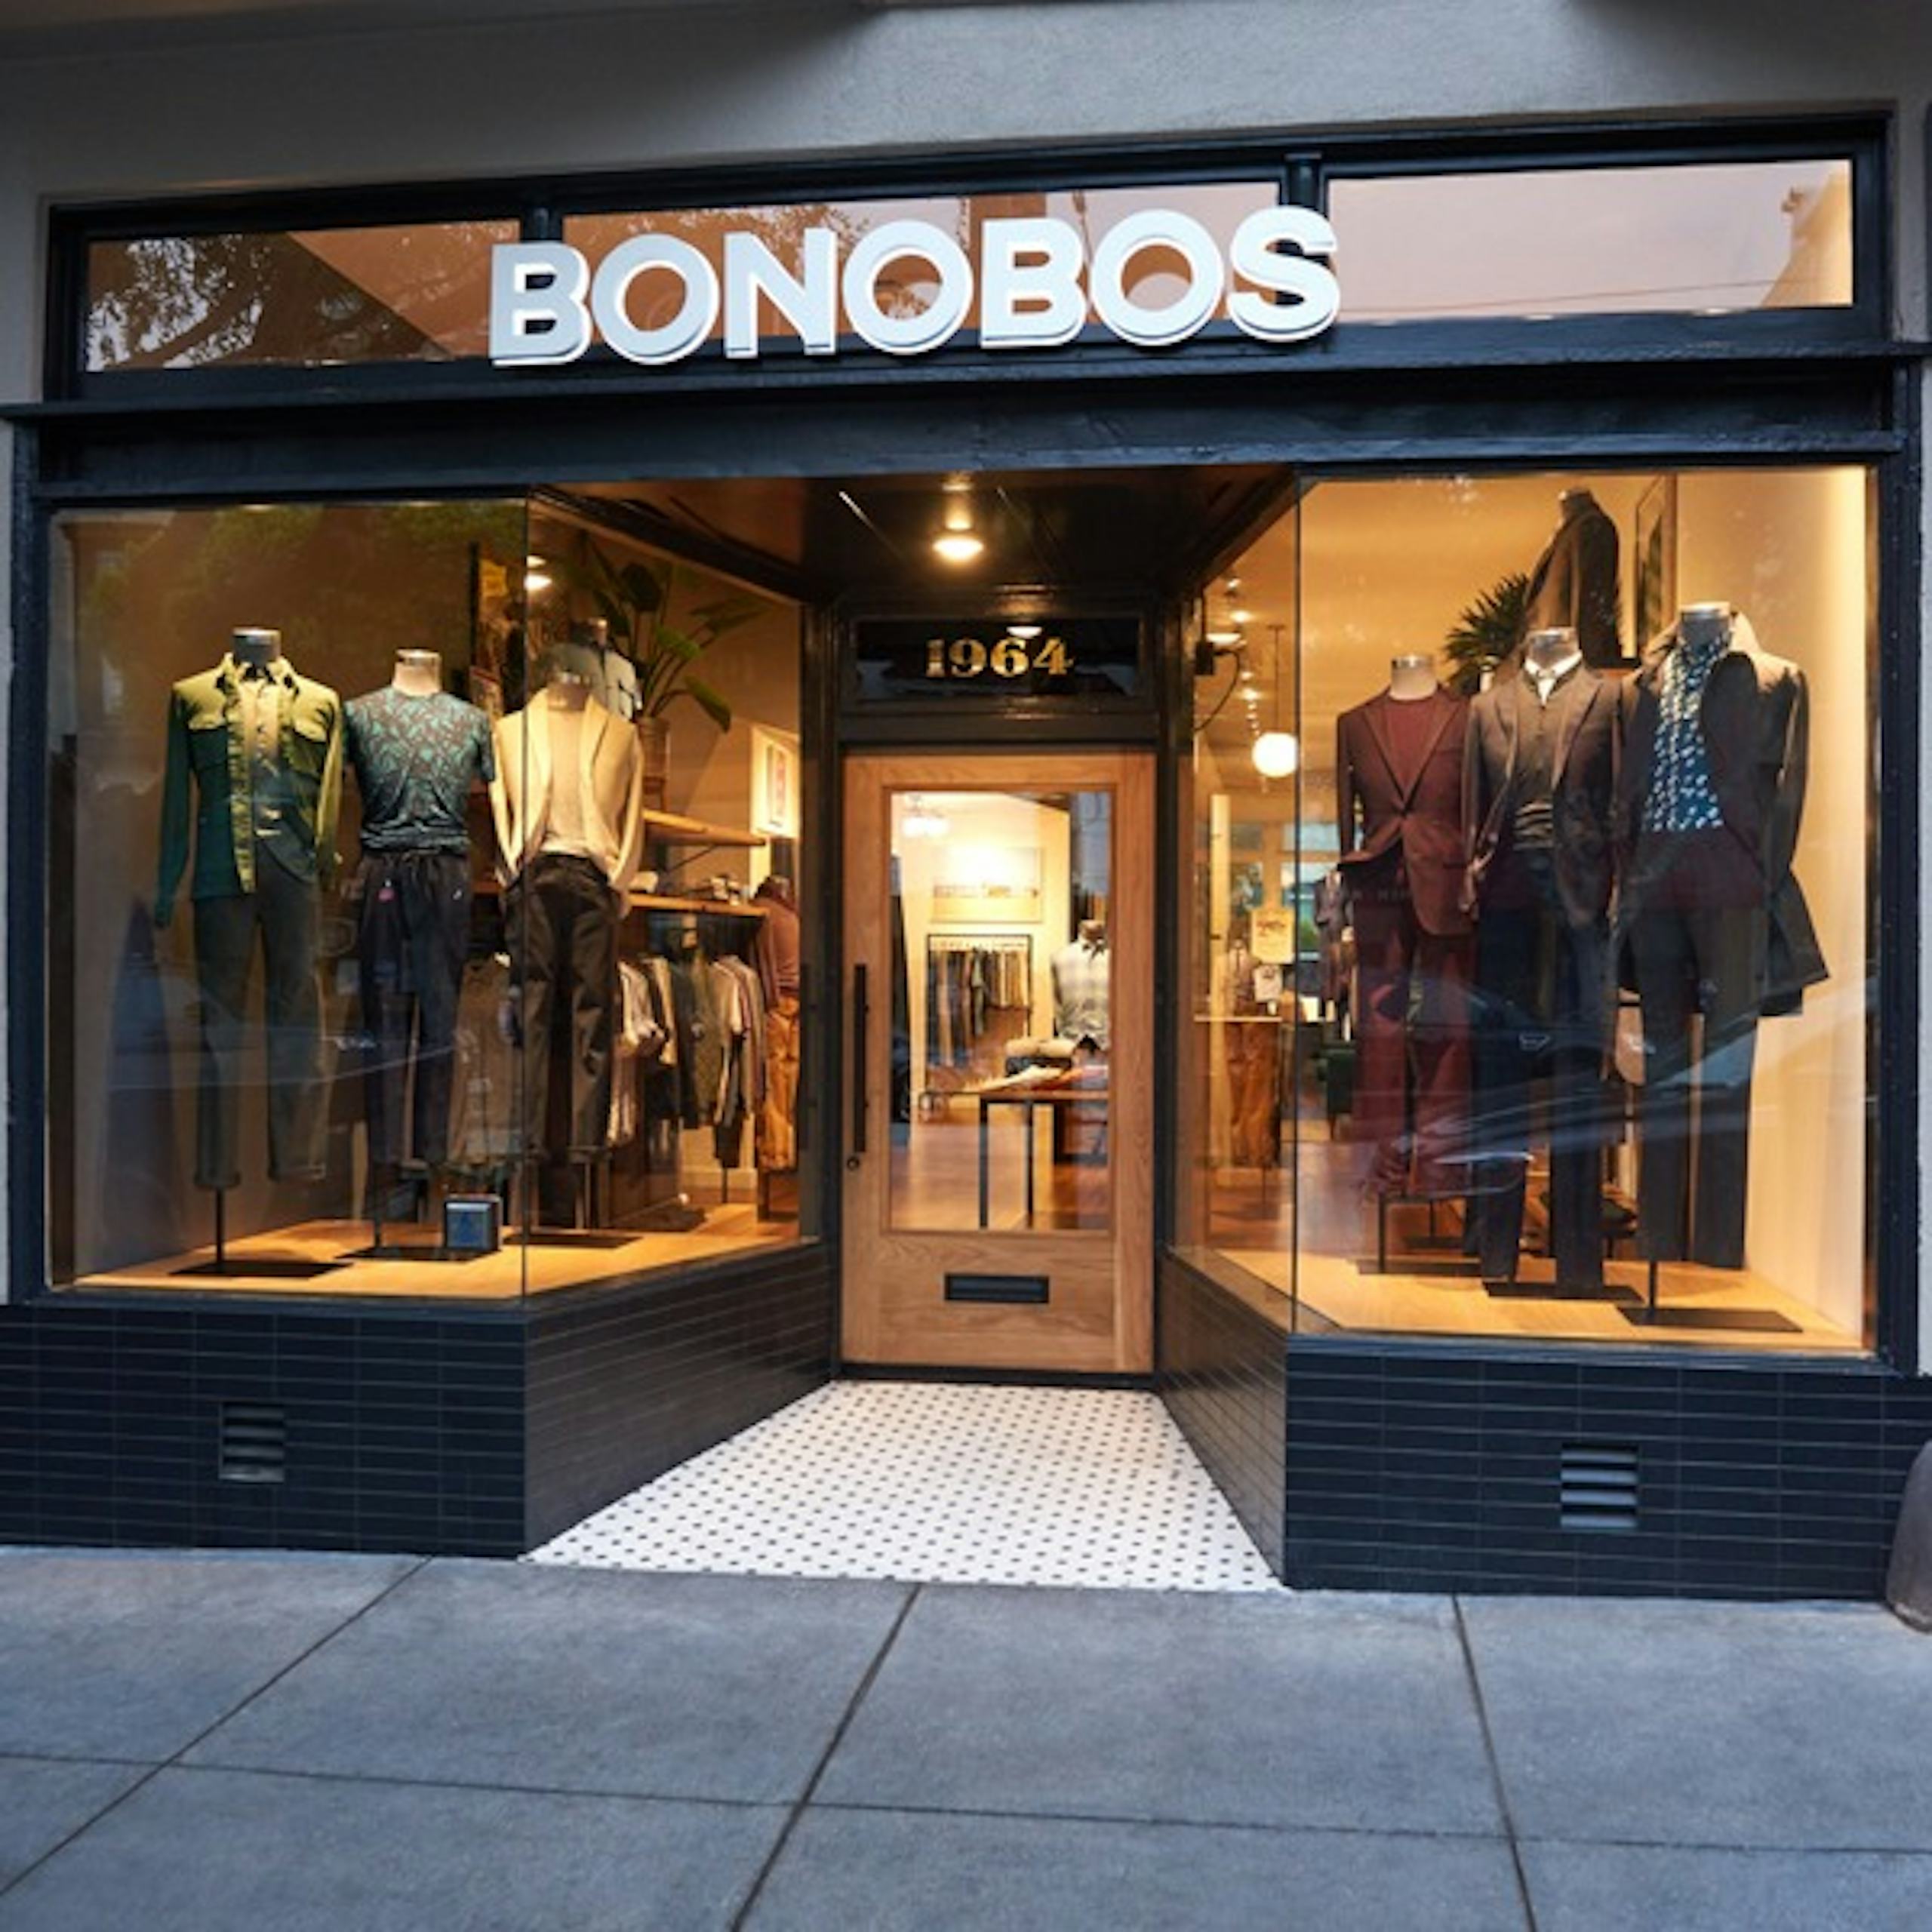 Image of Bonobos Storefront in Cow Hollow, San Francisco. 